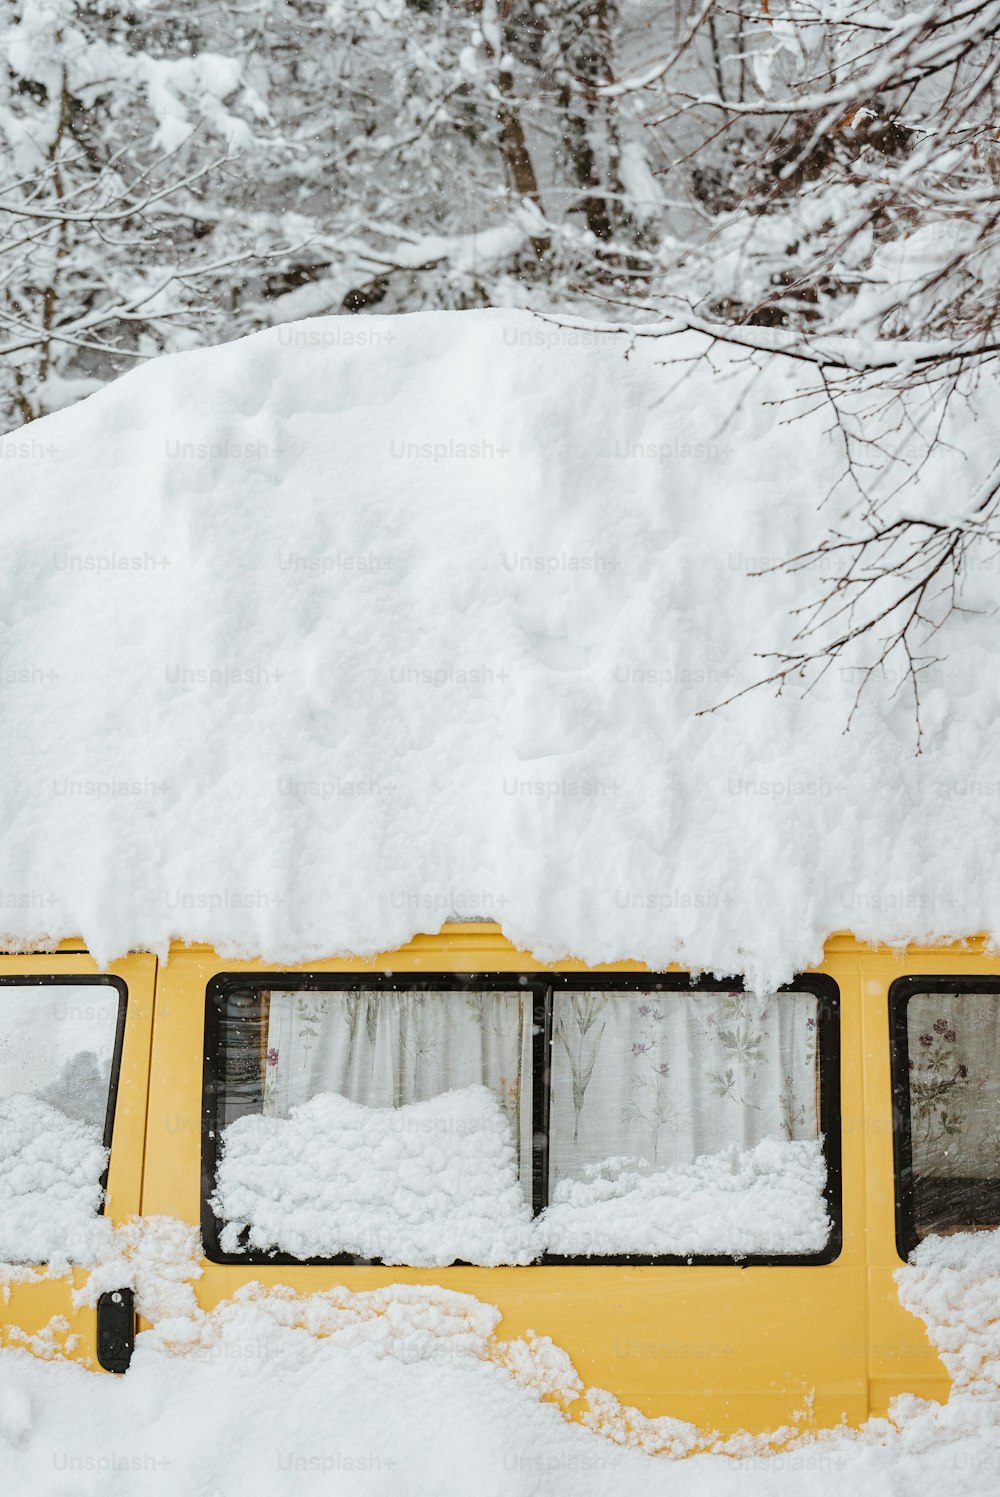 a yellow bus covered in snow next to trees